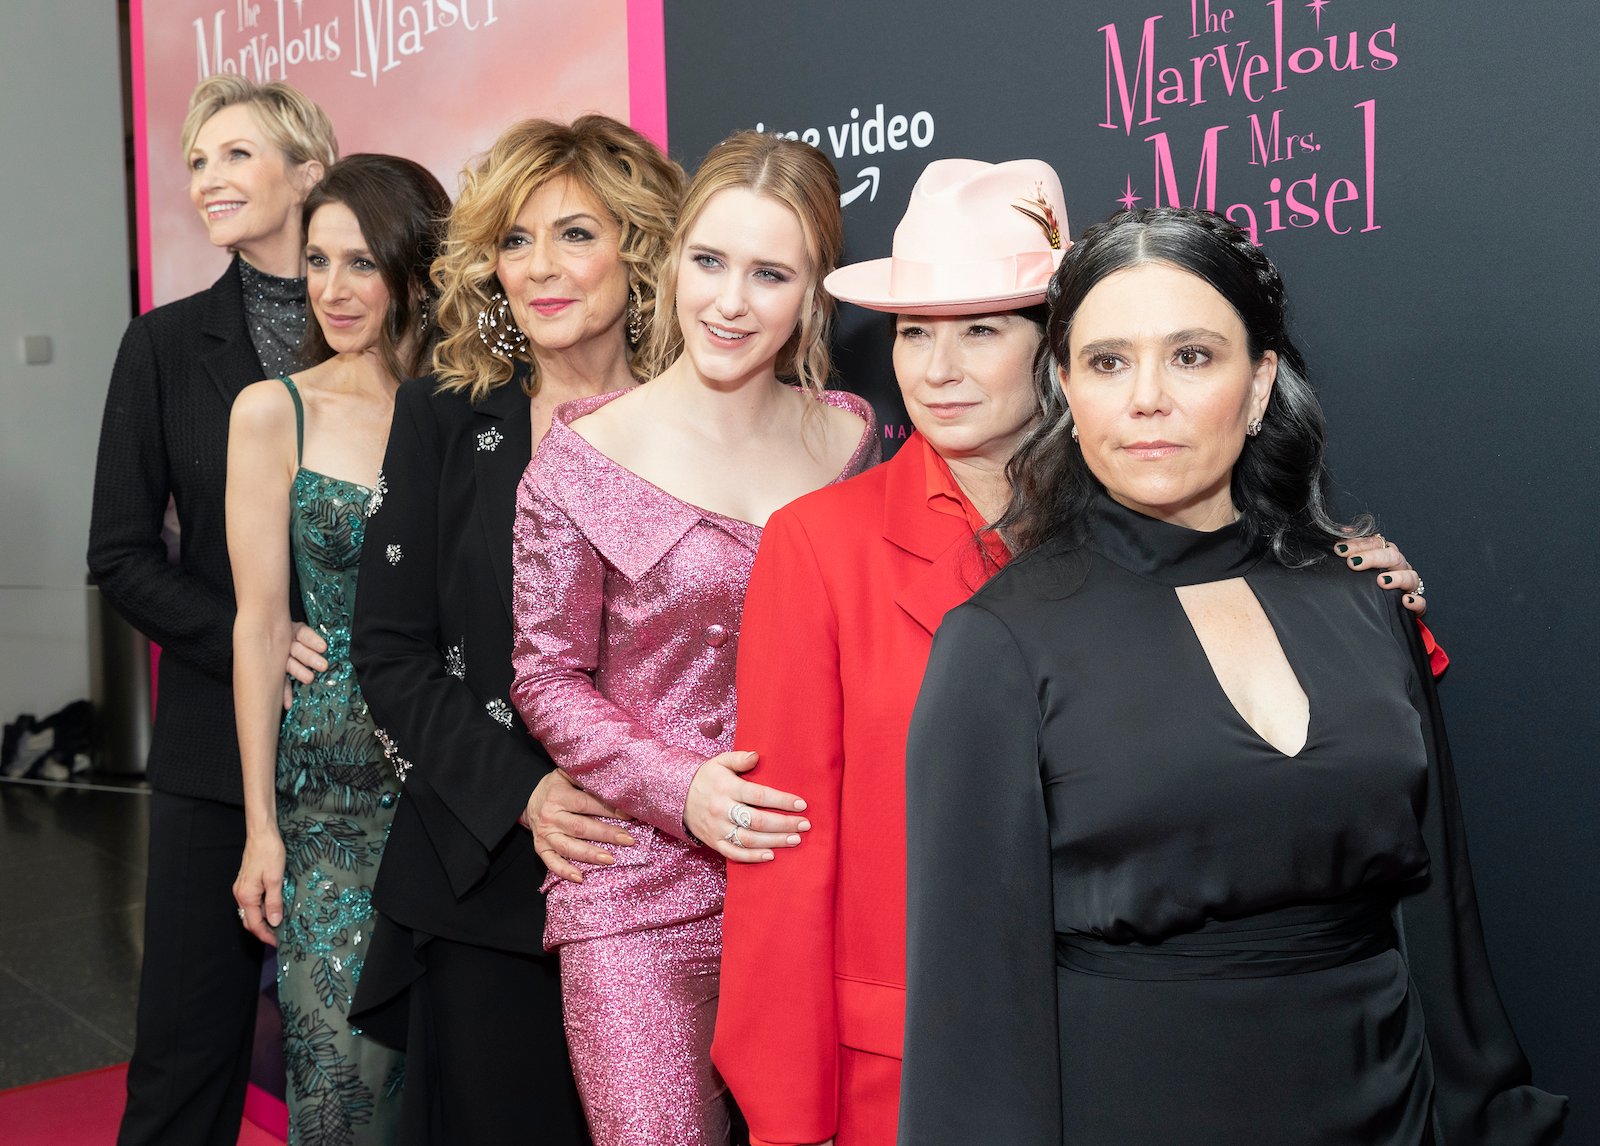 The cast of The Marvelous Mrs. Maisel attended the season 3 TV show premiere